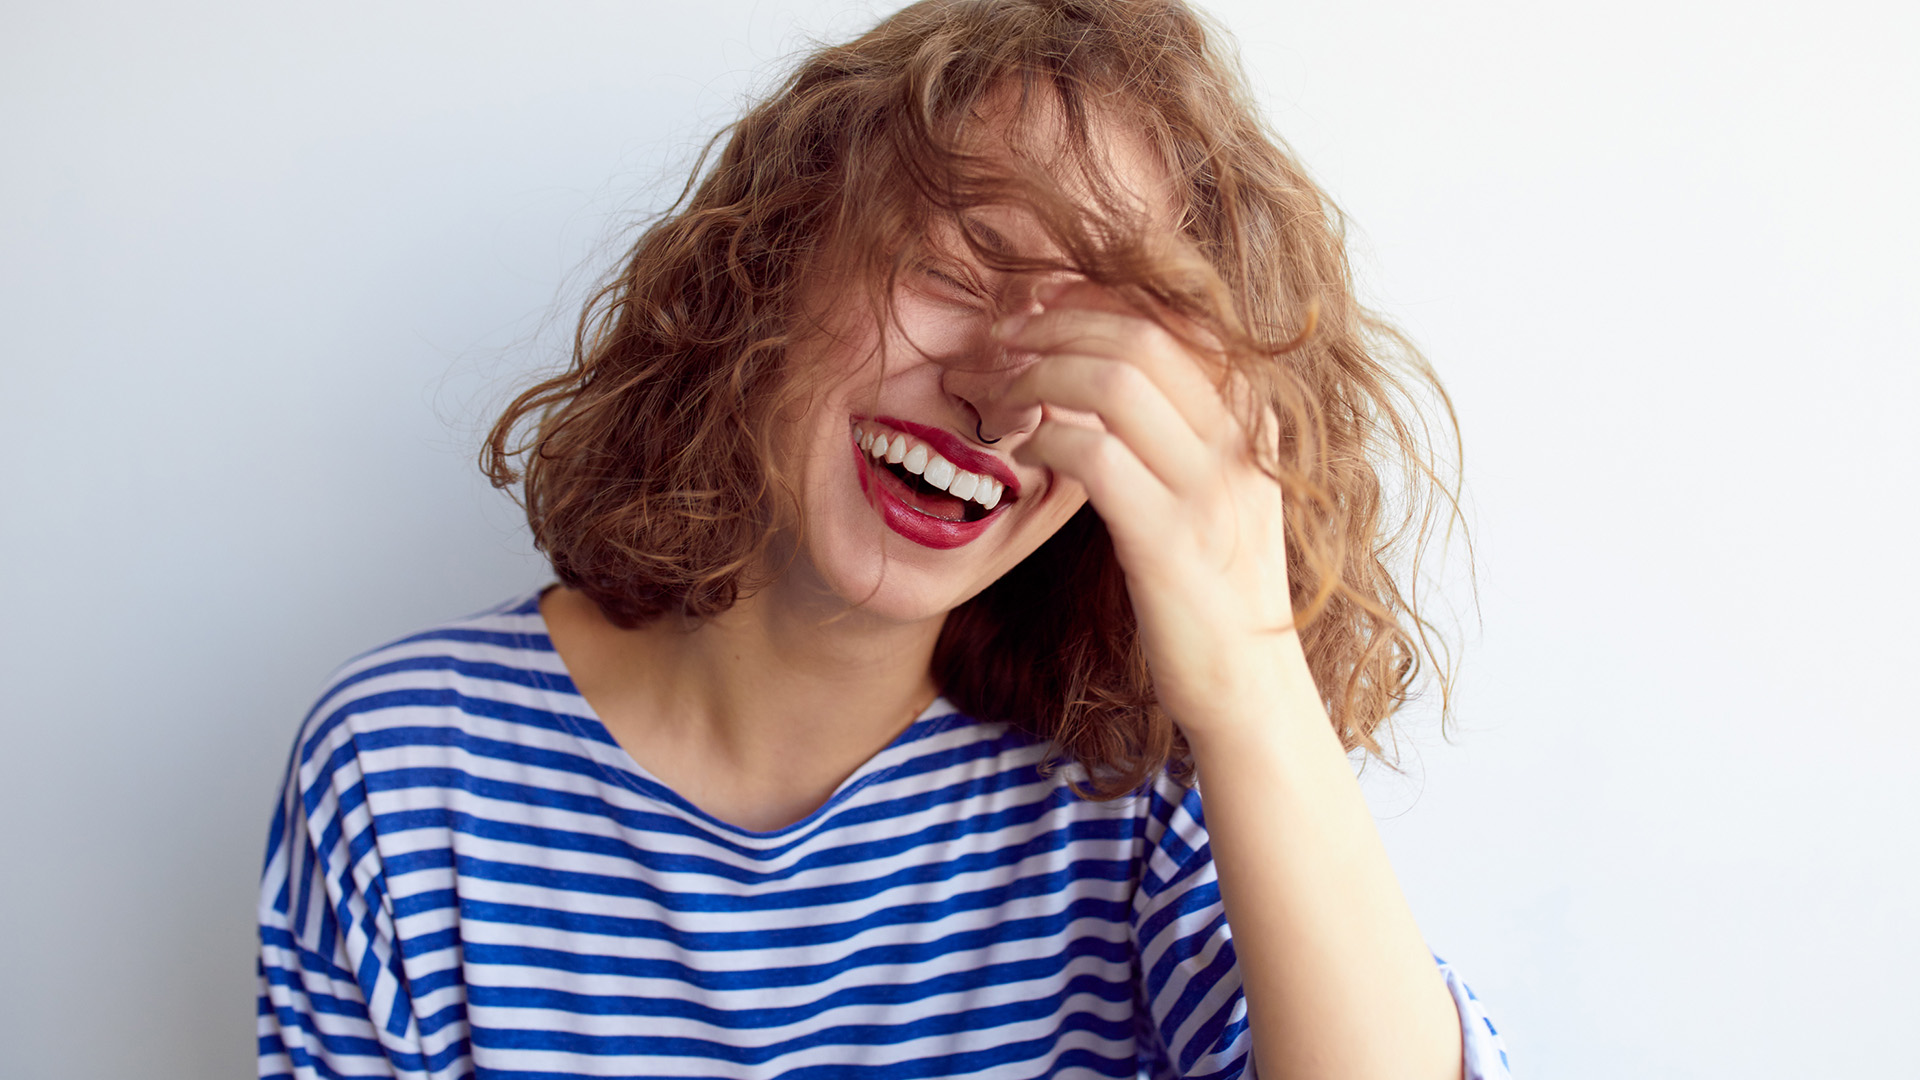 Brunette woman in red lipstick and blue-white striped shirt, holding the bridge of her nose while laughing.